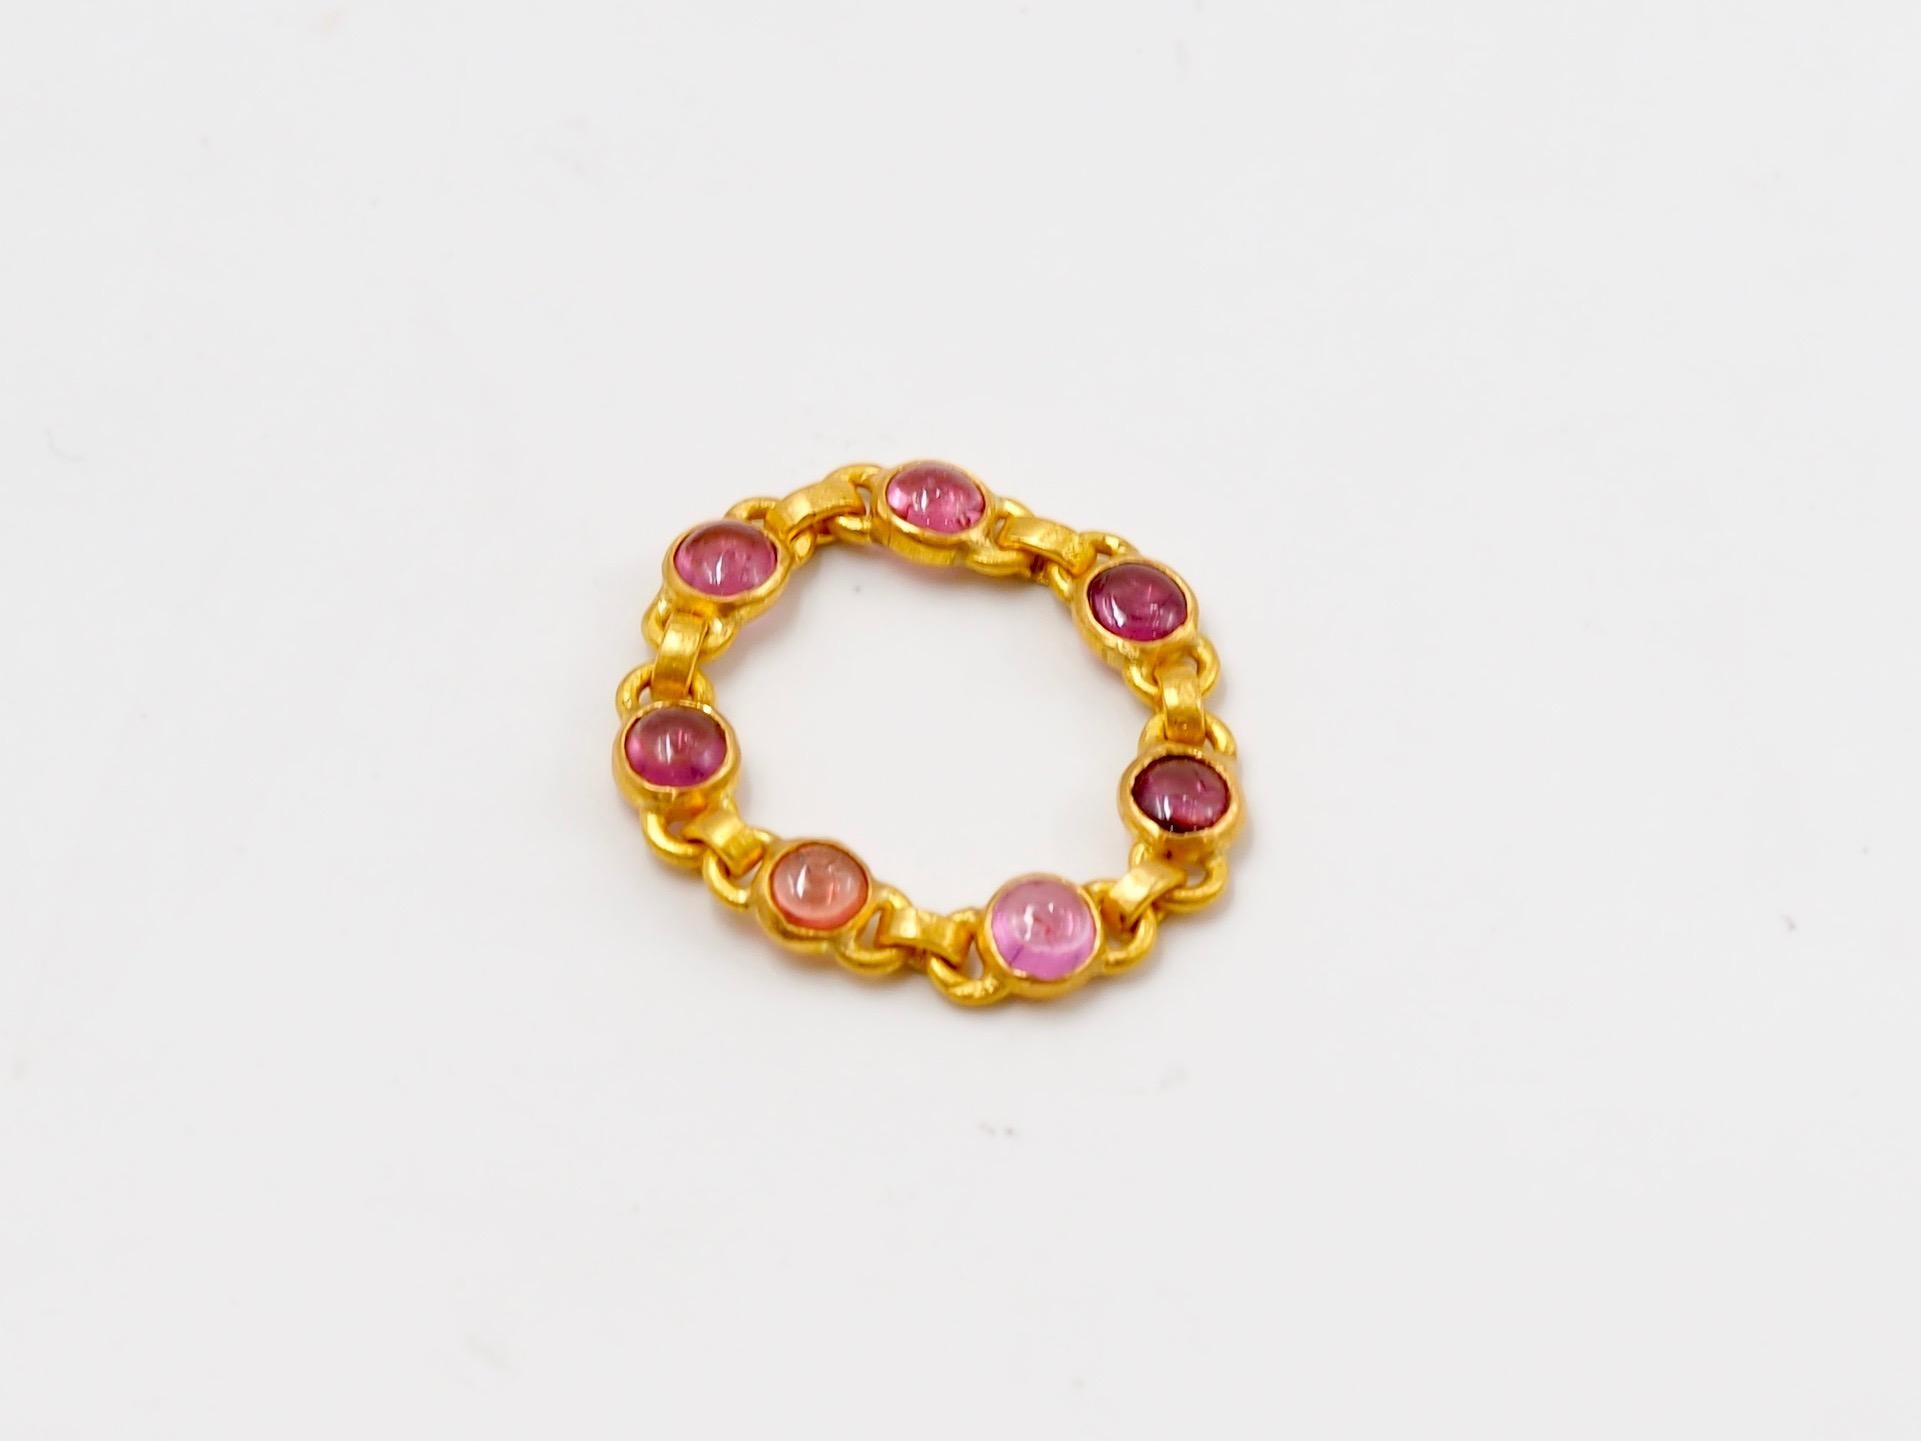 This ring by Scrives is made of 7 spinel cabochons set in 22 karat Gold. The colours of the spinels range from pink to light purple. The spinel are natural and untreated from Myanmar / Burma. 
The ring is like a chain, flexible and very confortable